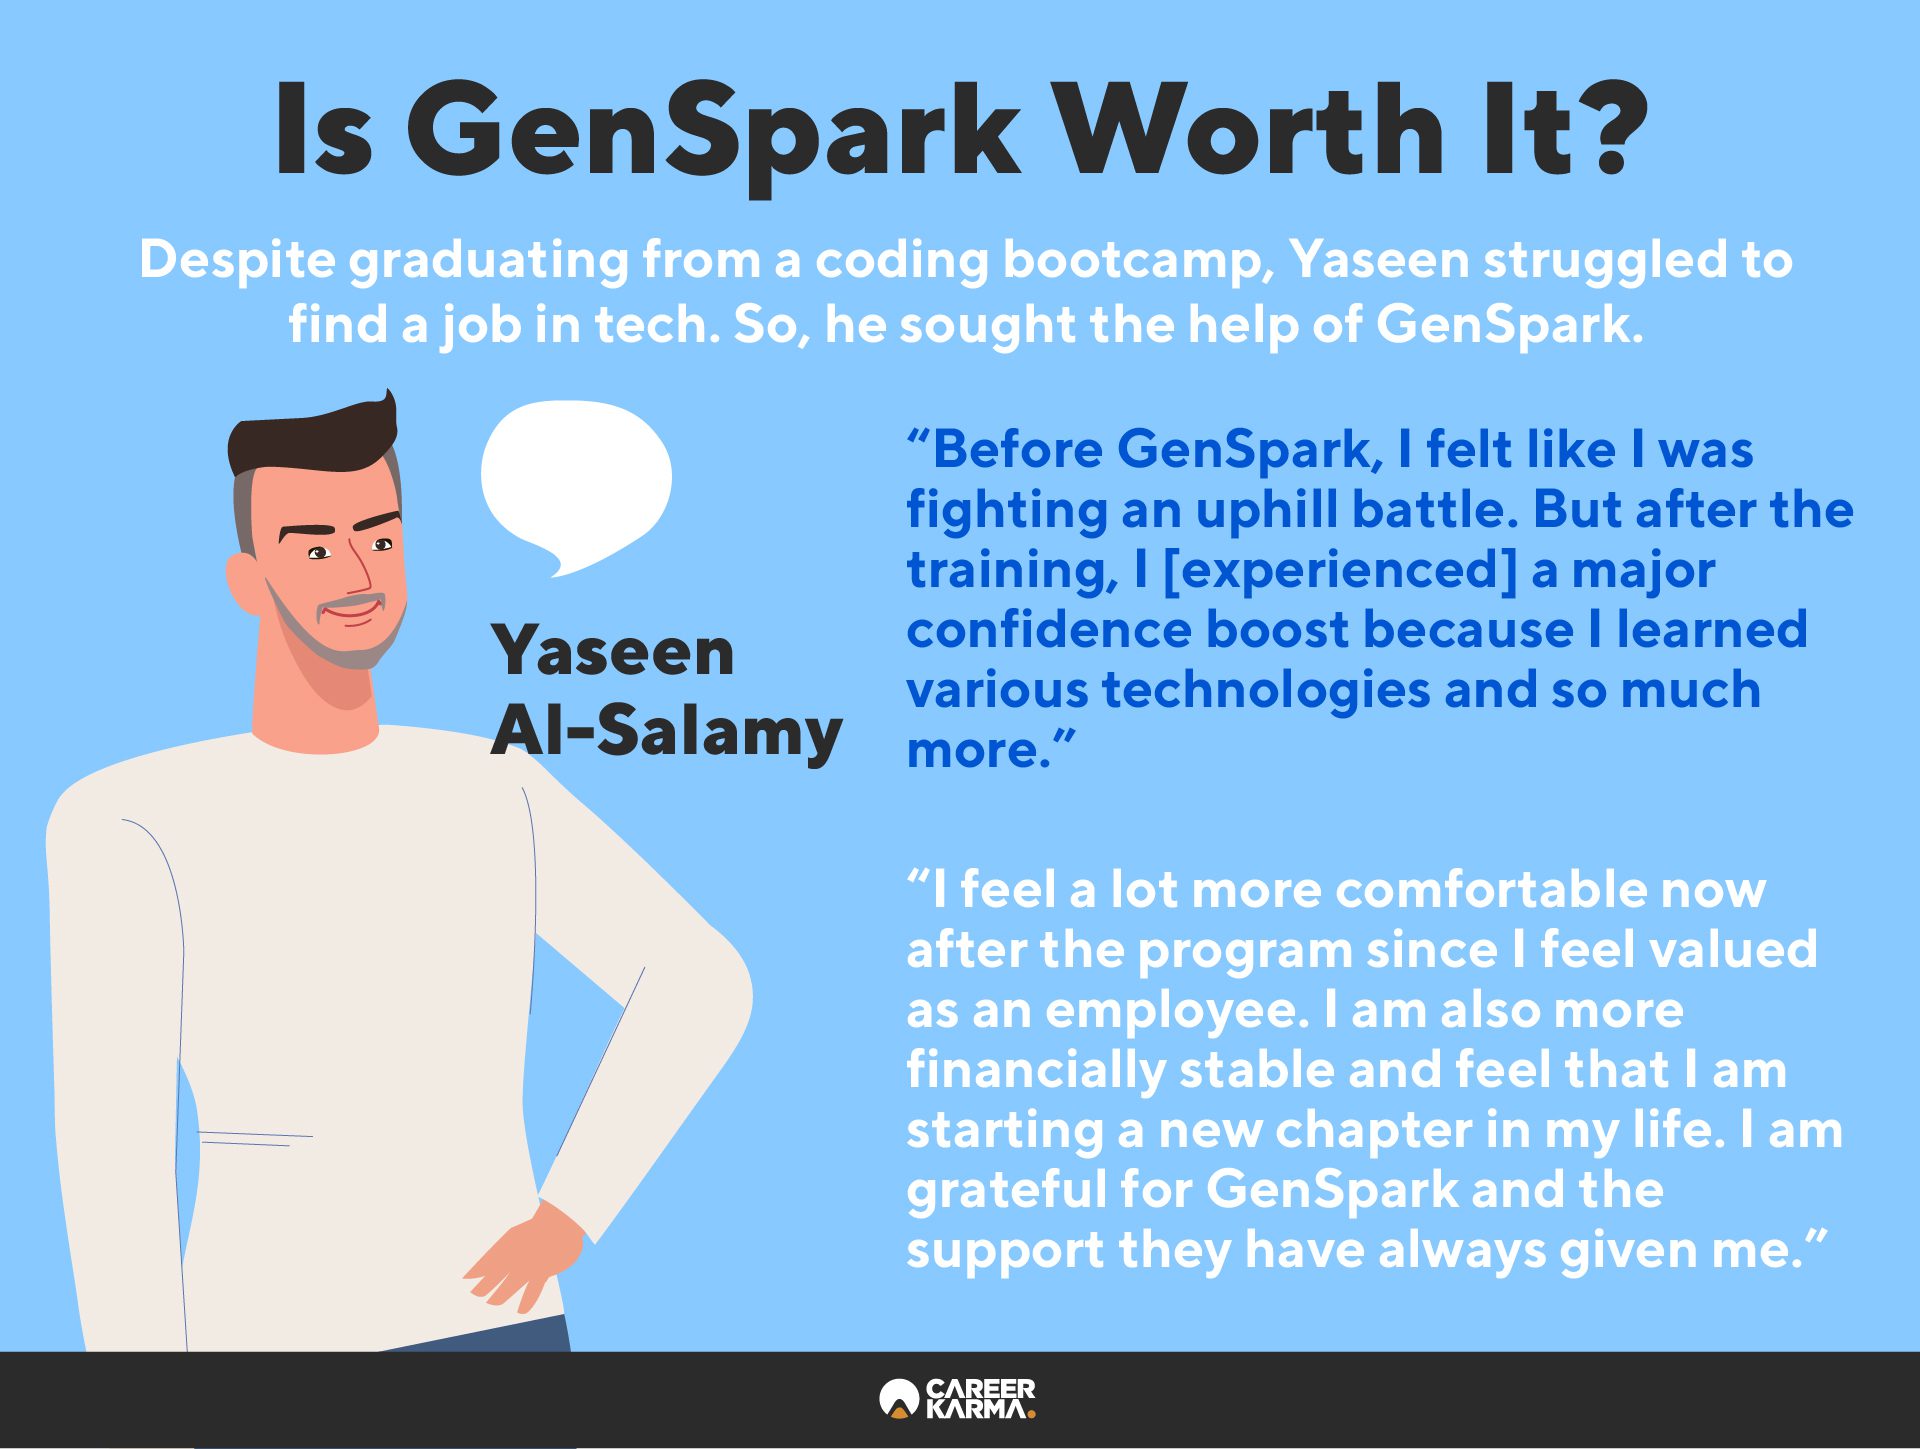 An infographic featuring GenSpark participant Yaseen Al-Salamy’s review of the program